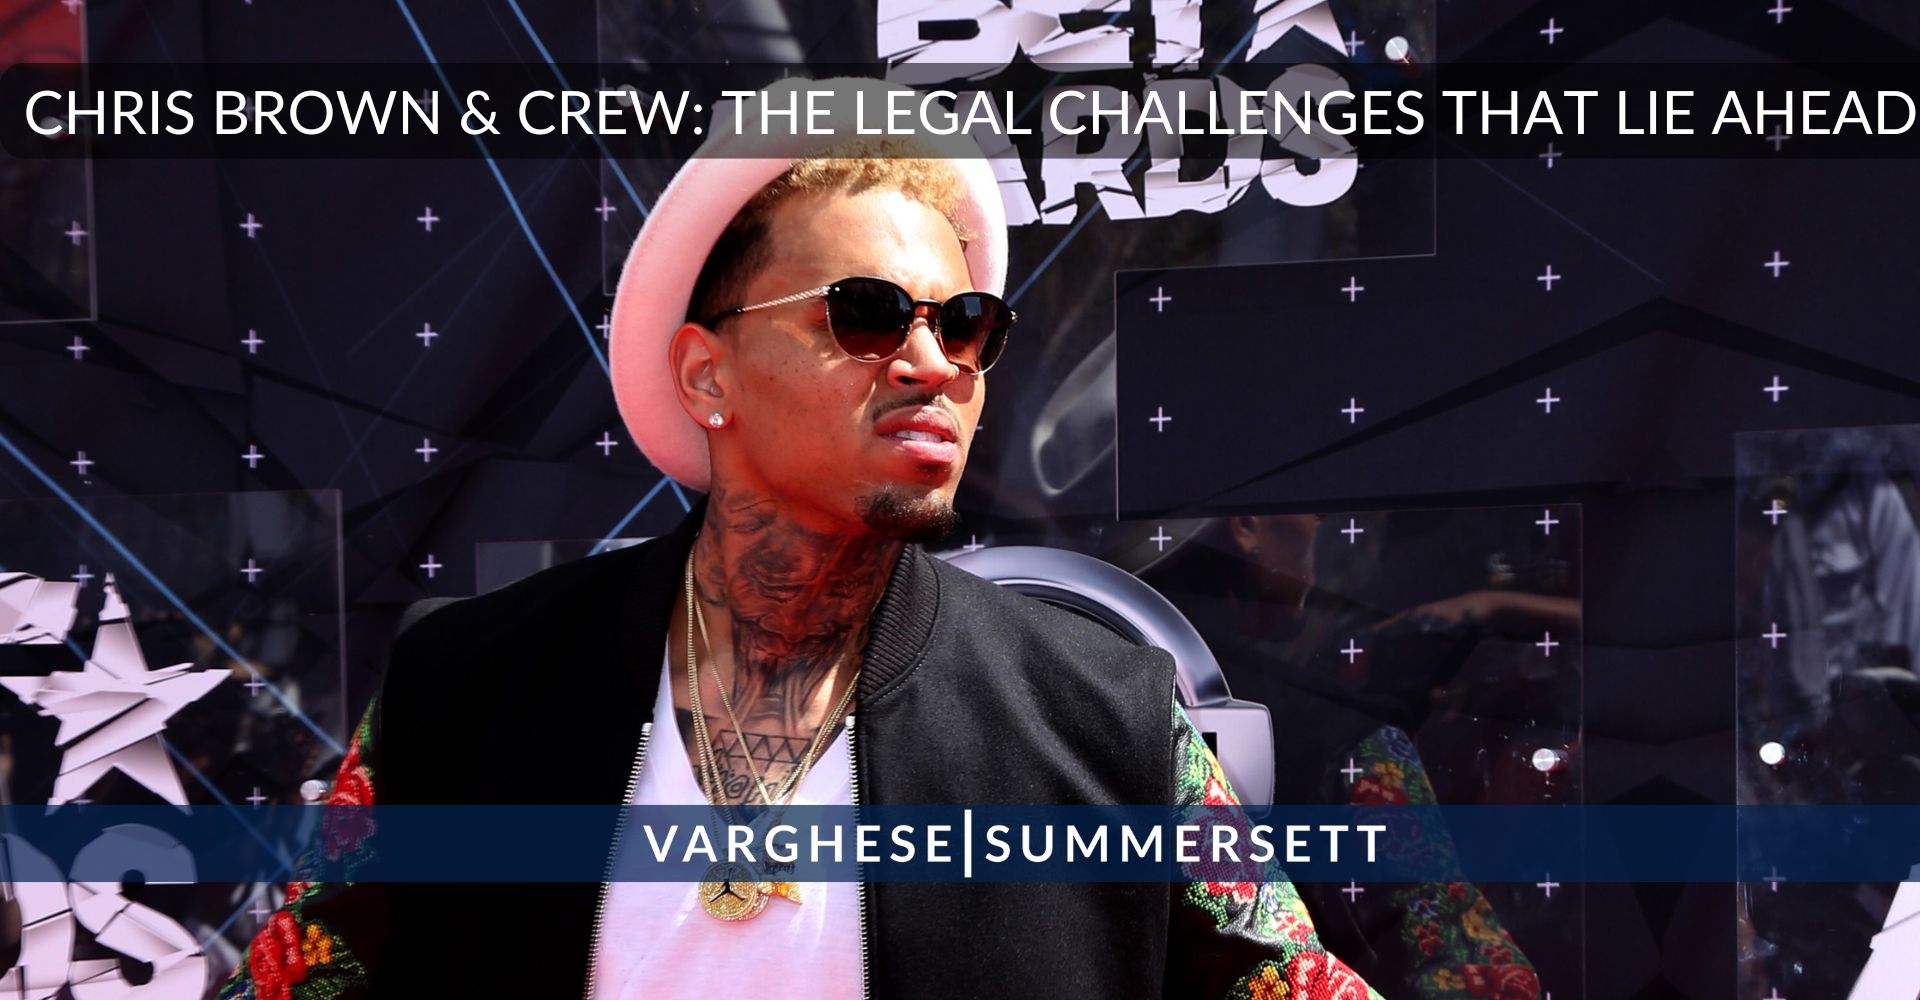 Chris Brown Accused of Assault: What Legal Challenges Lie Ahead